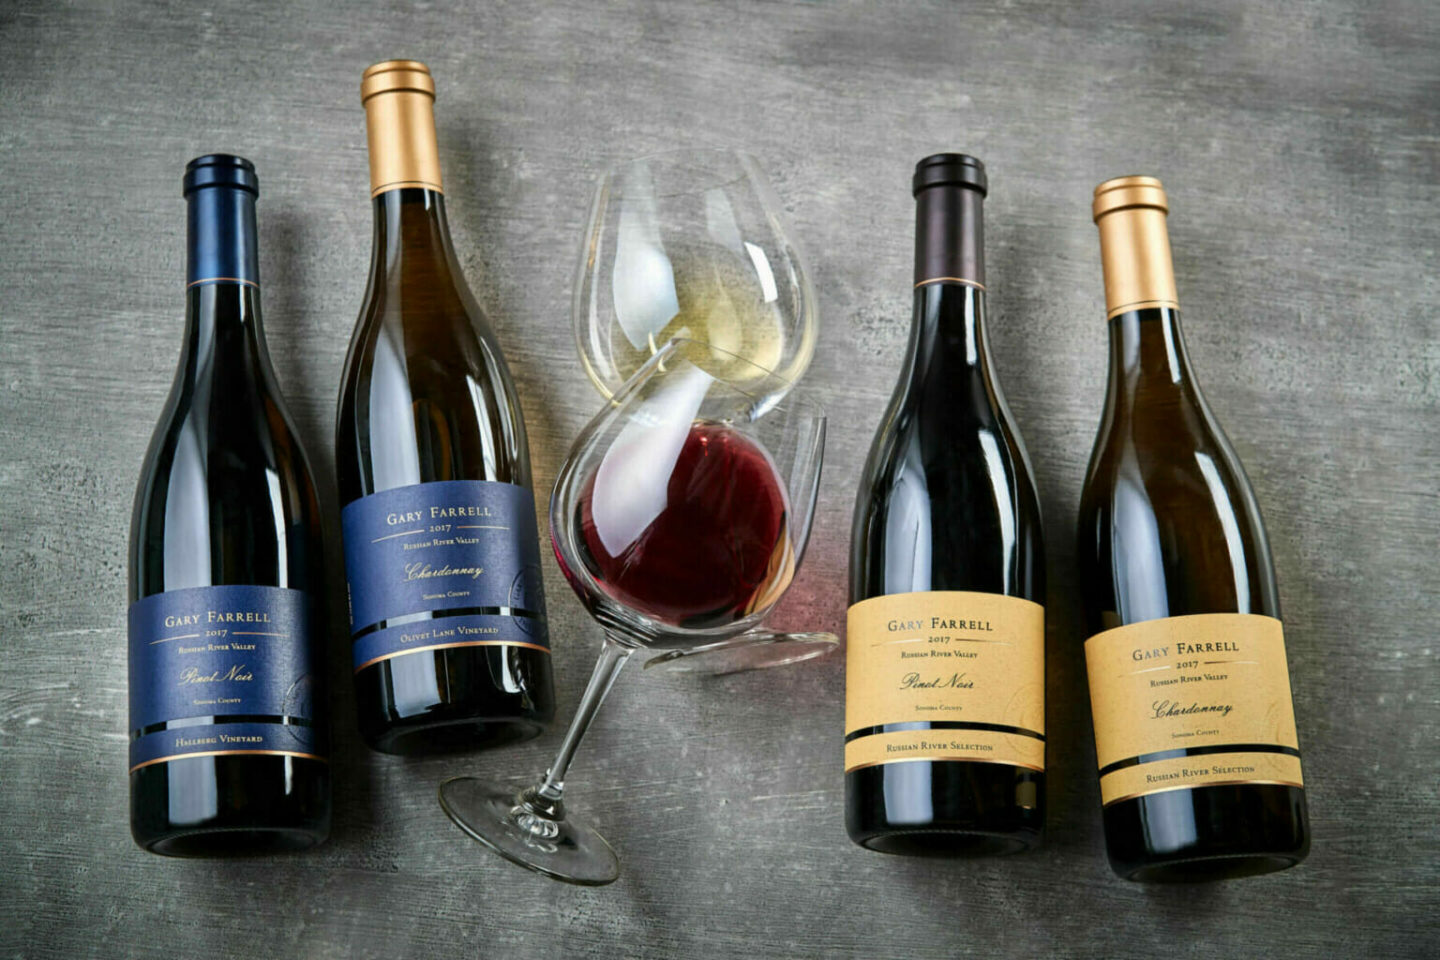 Bottles of LGBTQ+wines and wine glasses